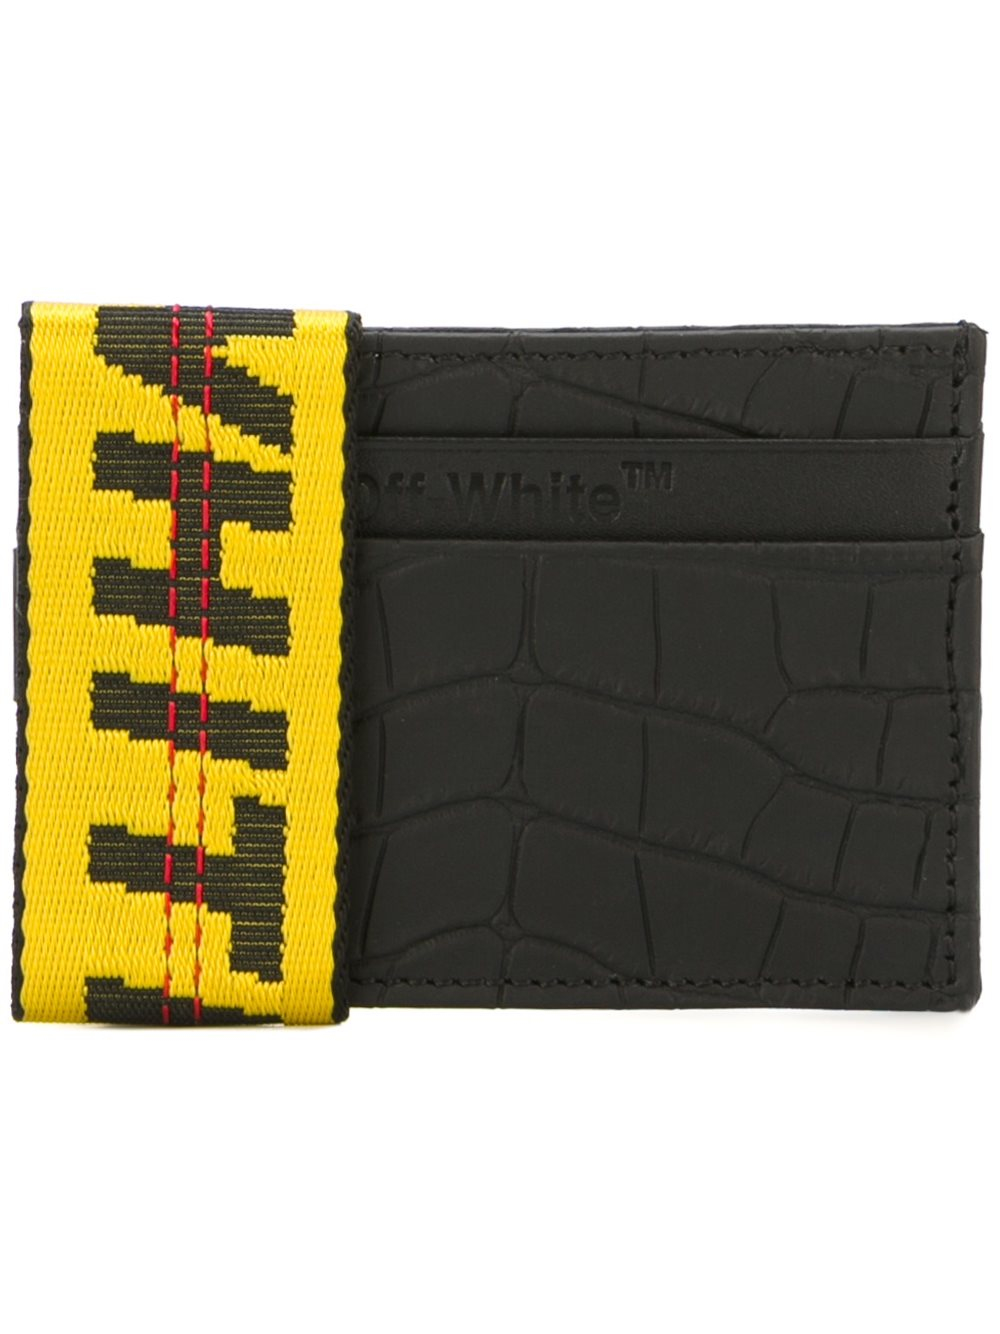 off white wallet